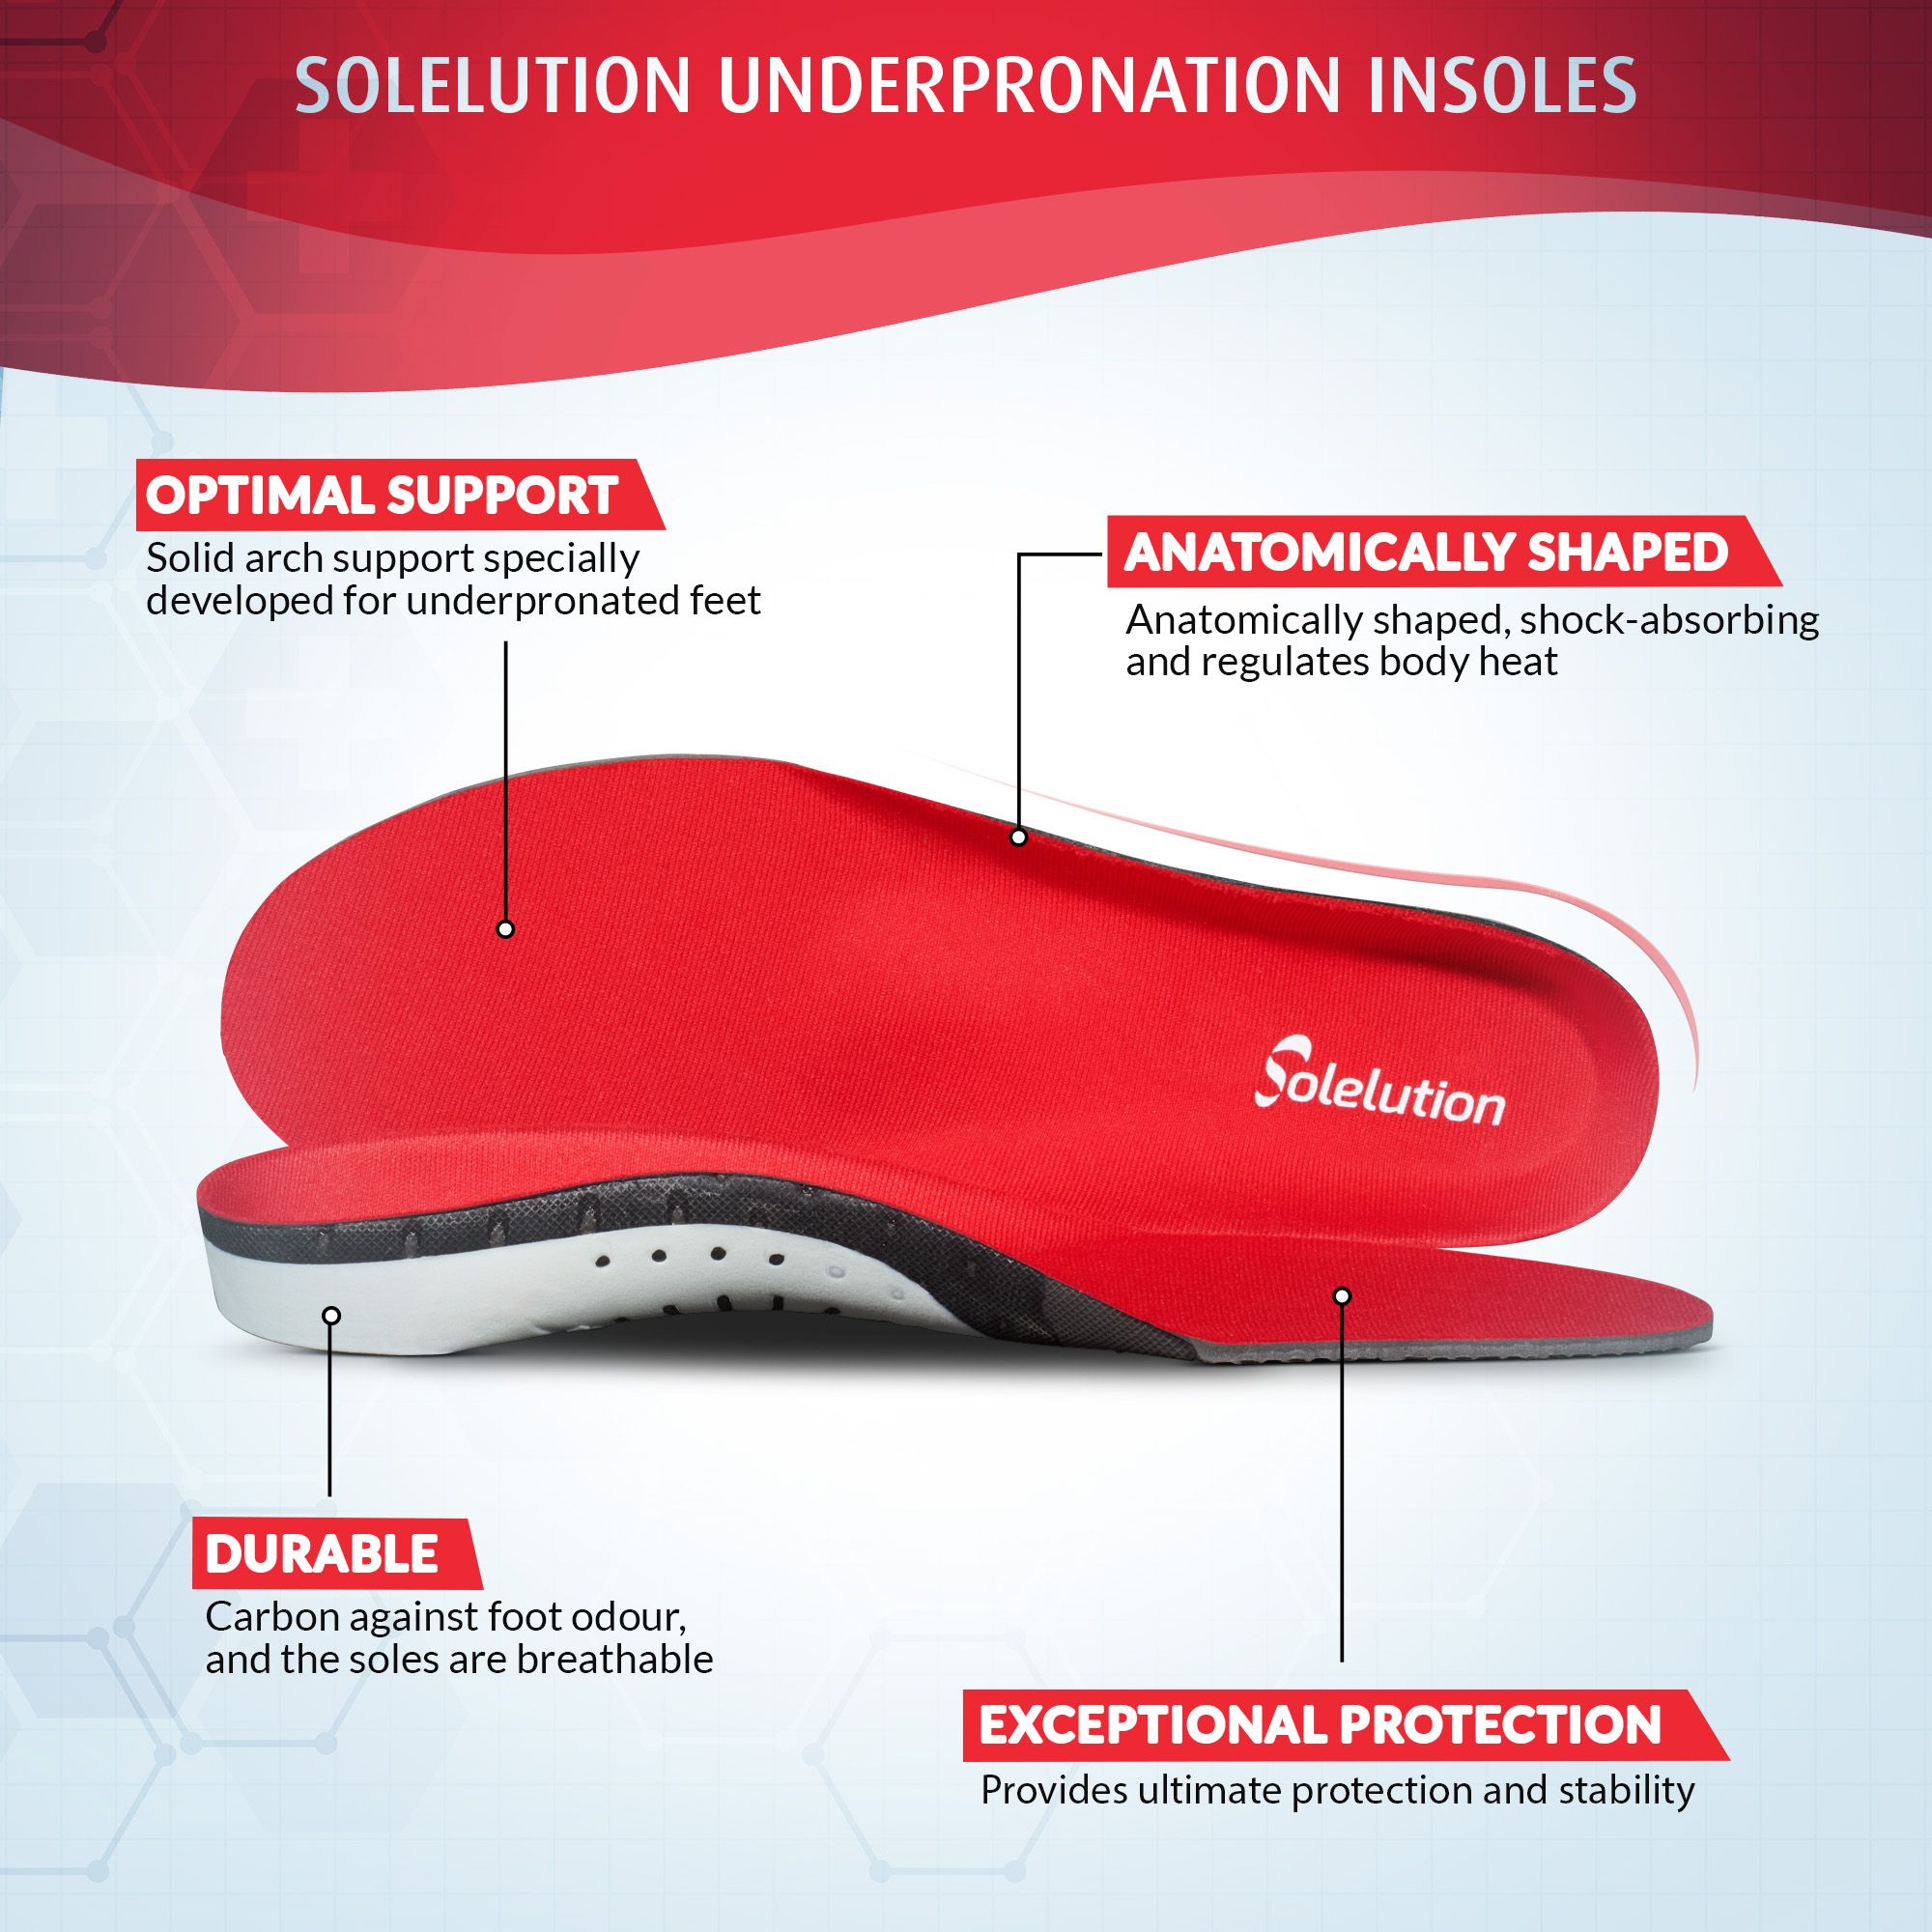 solelution under pronation insoles product information